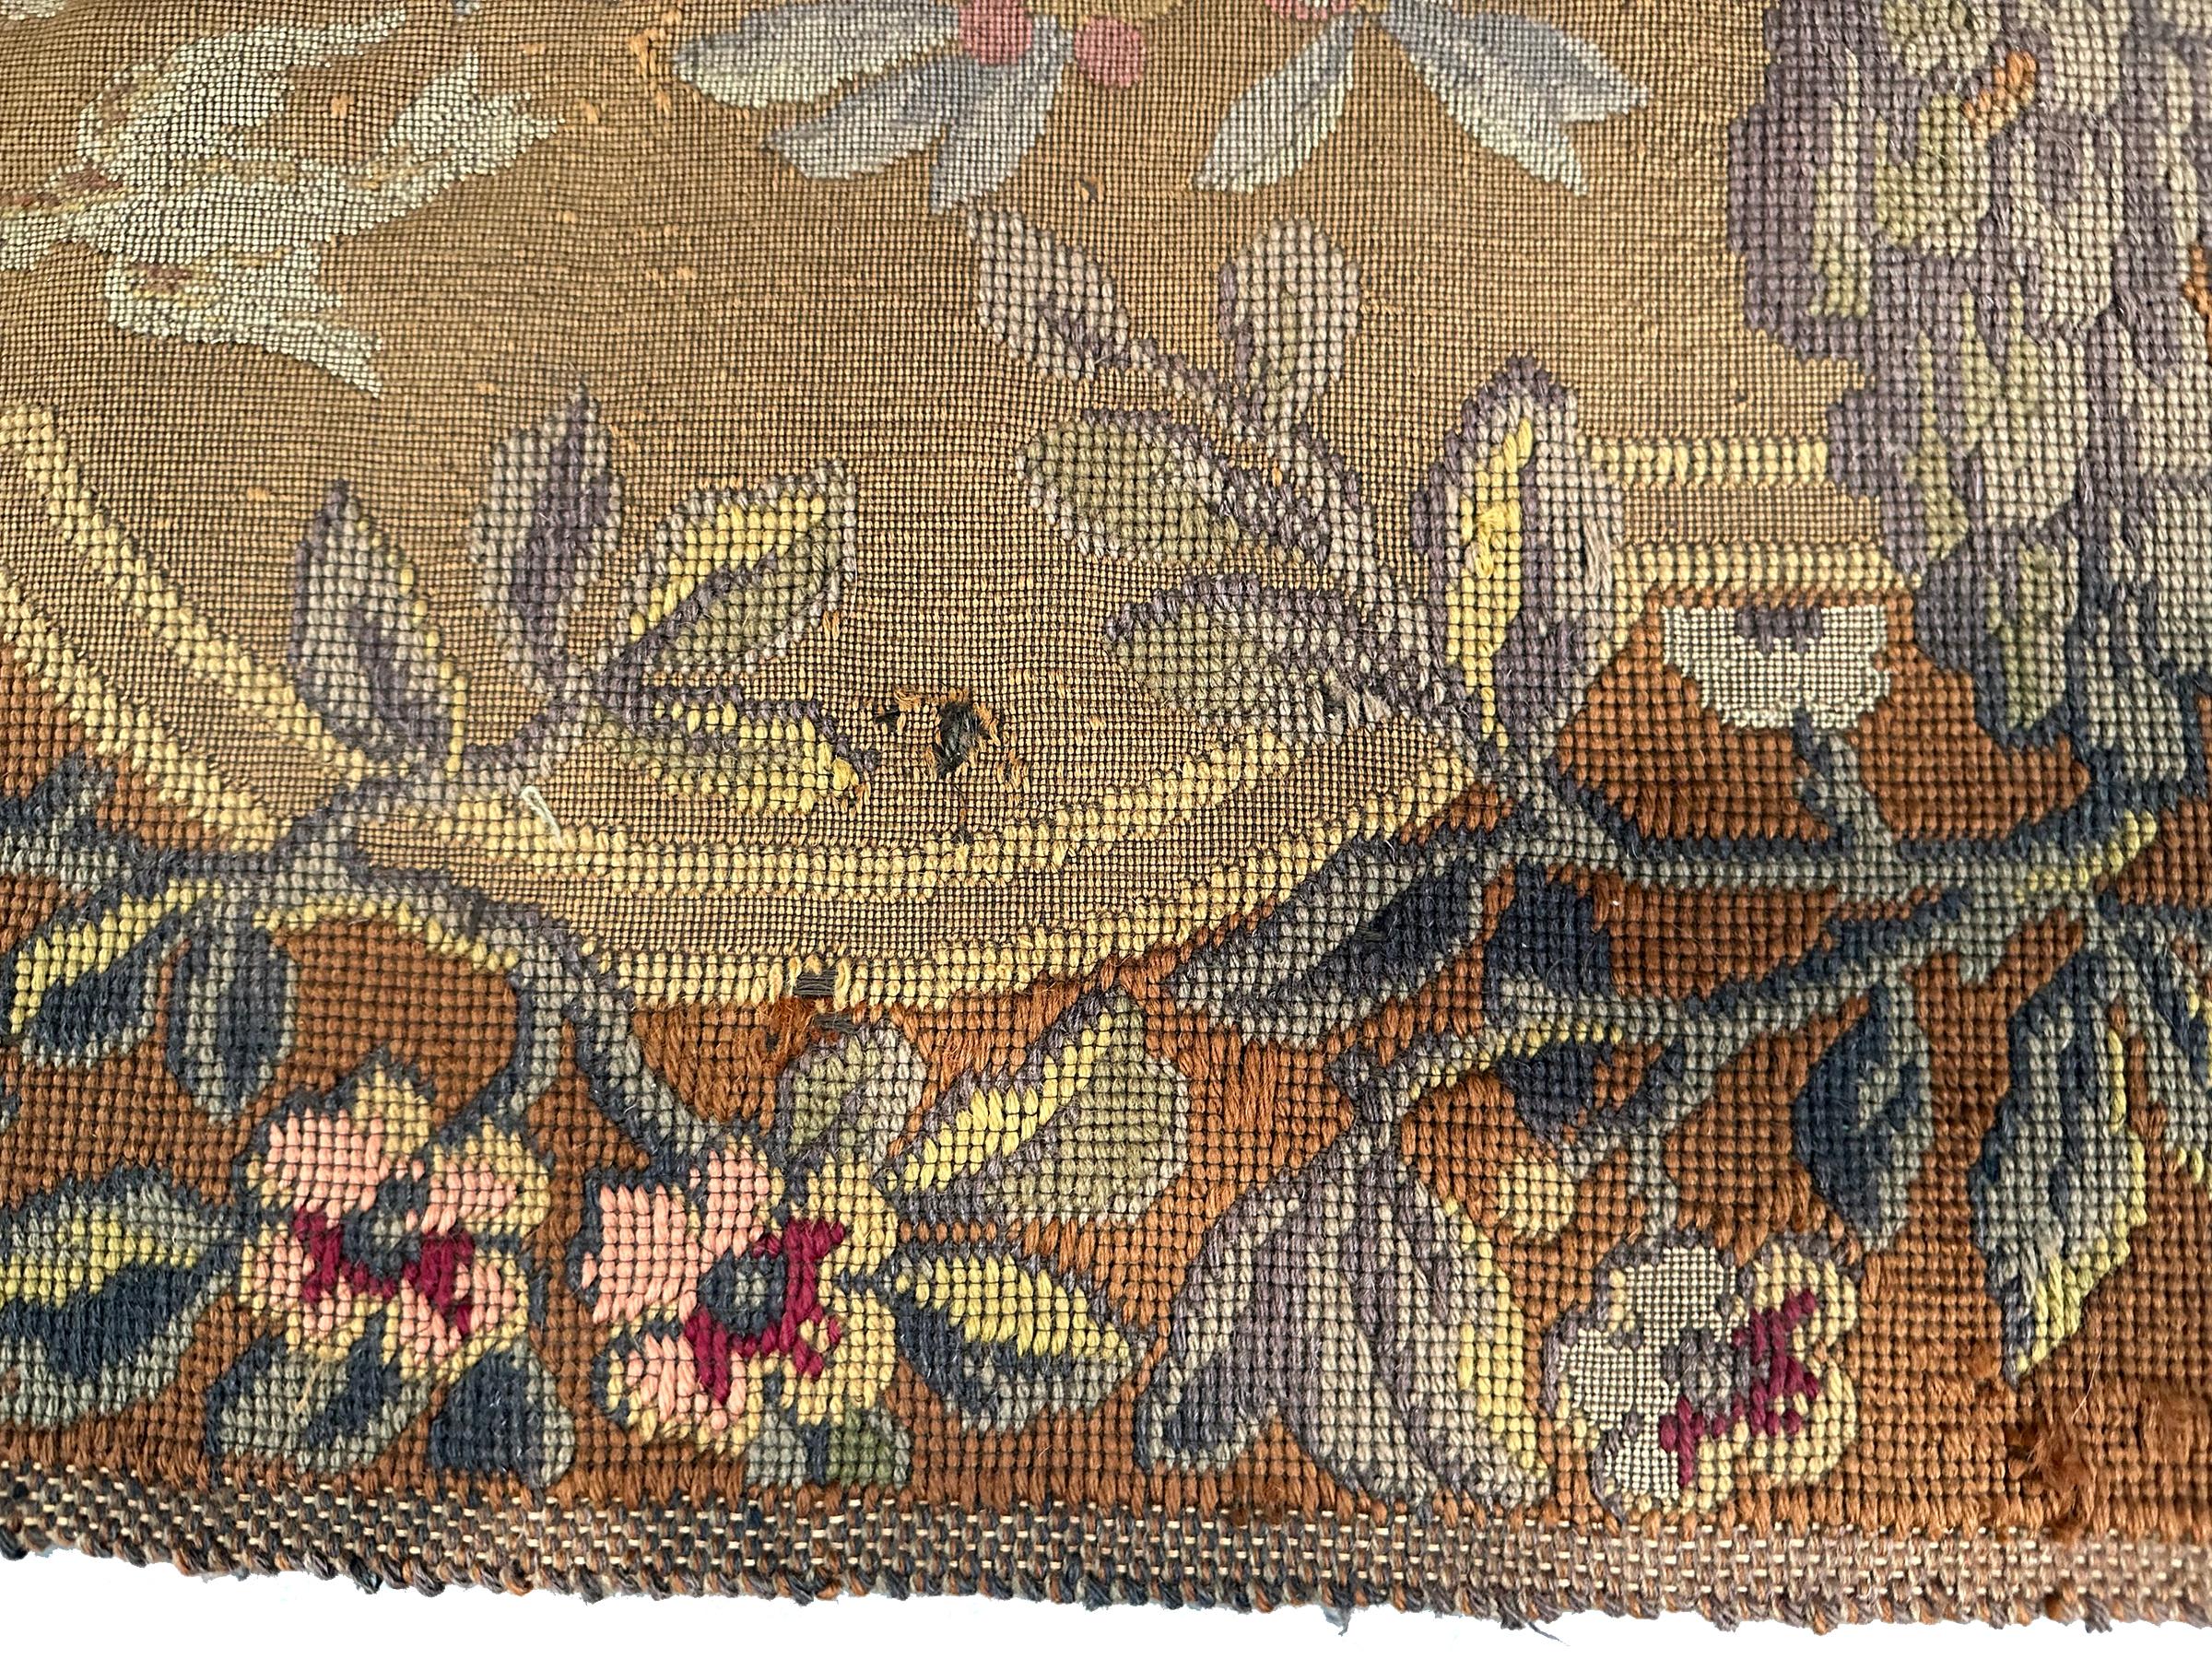 1920 Antique English Needlepoint Tapestry Wool & Silk 3x5 82cm x 158cm For Sale 5